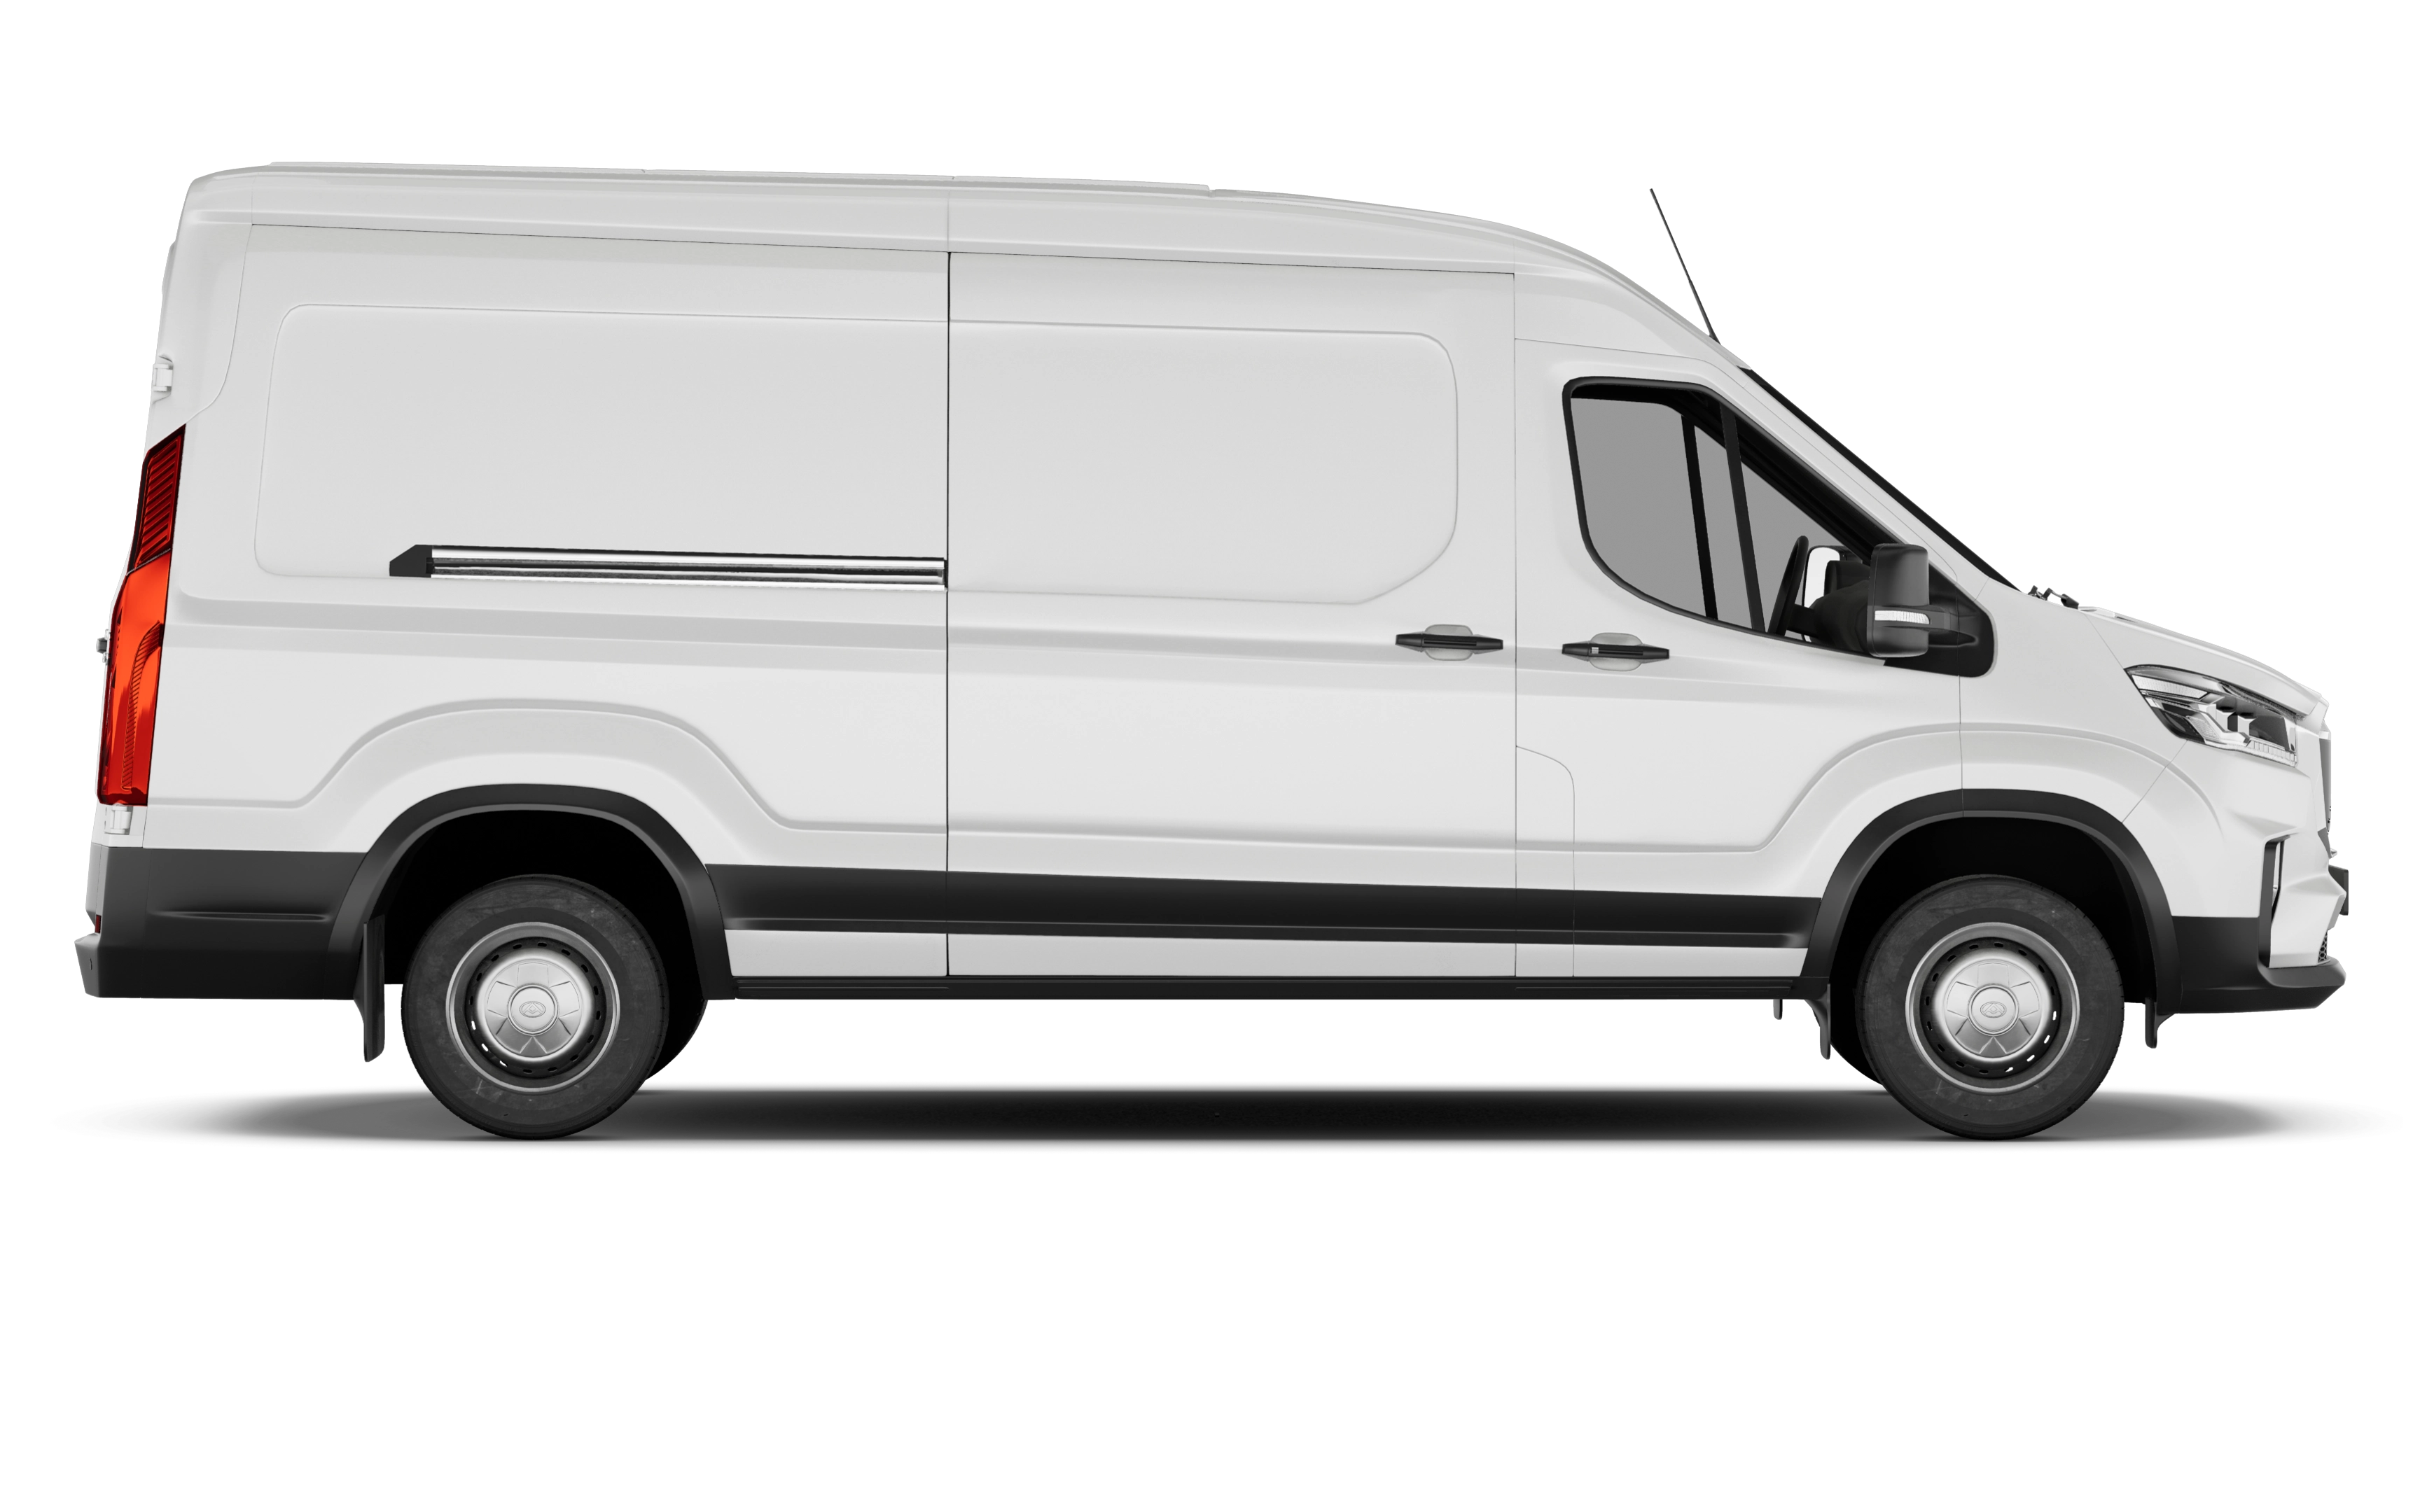 Maxus e deliver 9 lwb electric fwd 150kw high roof van 51.5kwh auto